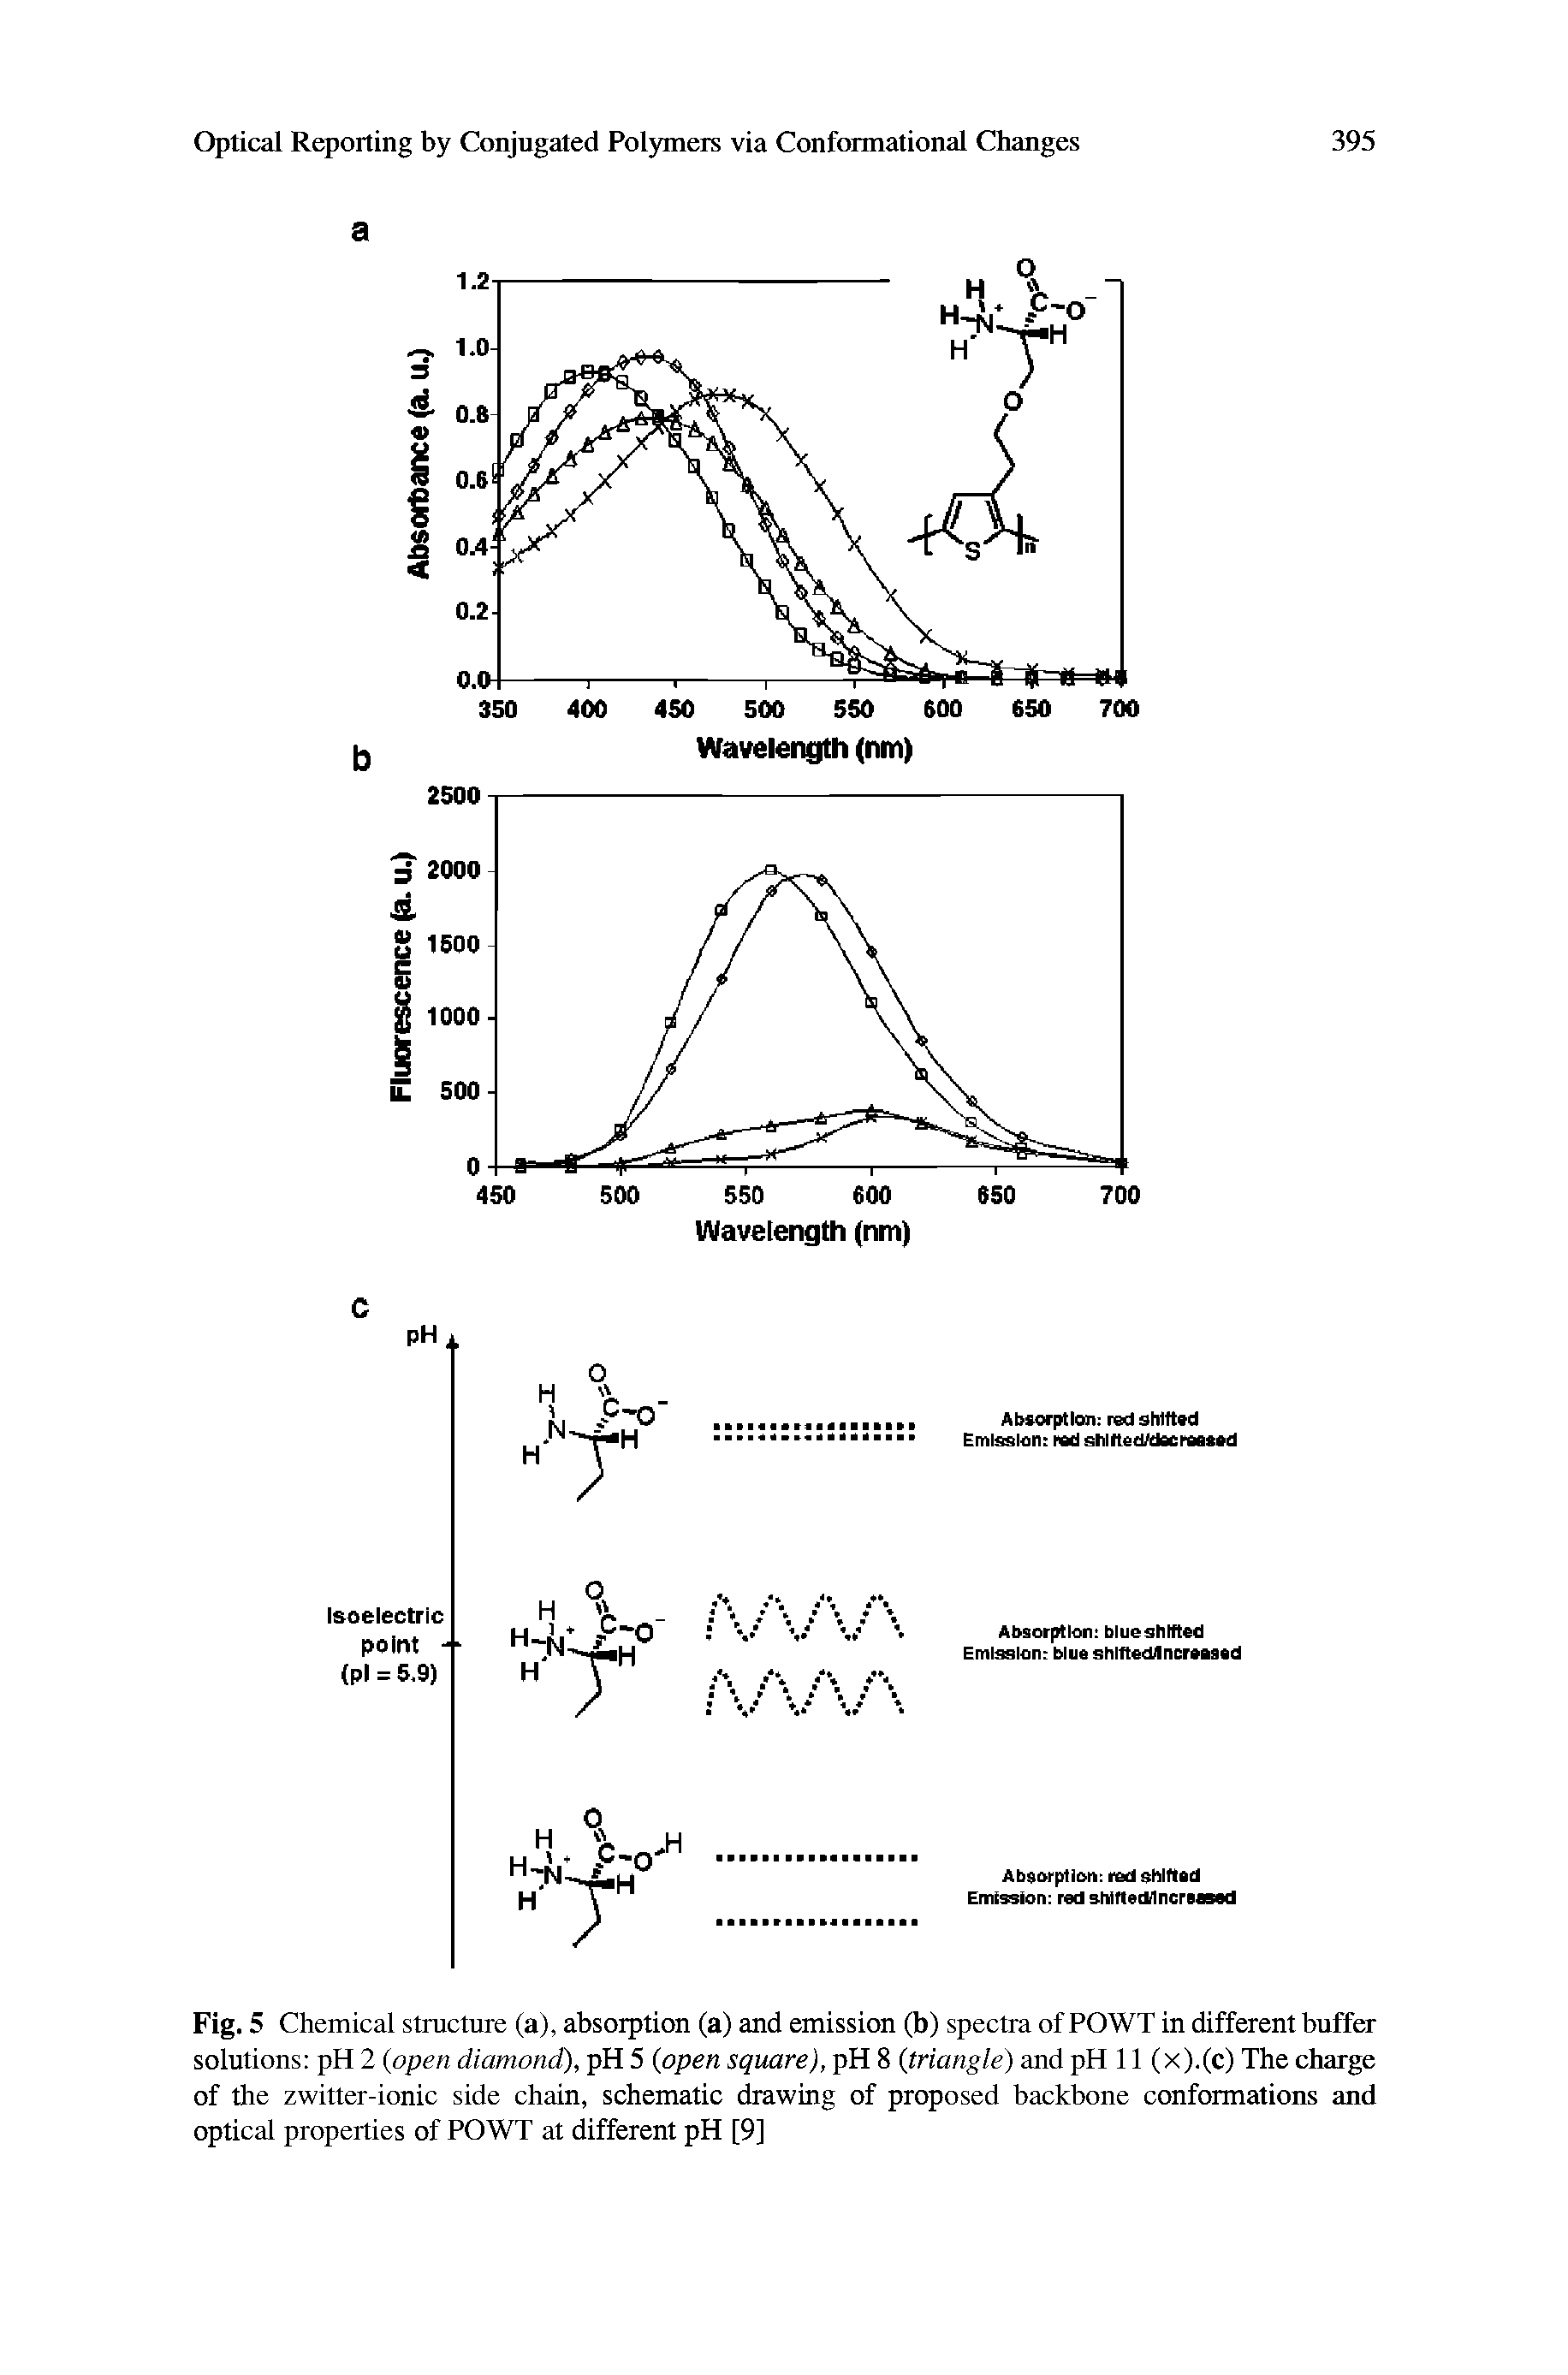 Fig. 5 Chemical structure (a), absorption (a) and emission (b) spectra of POWT in different buffer solutions pH 2 (open diamond), pH 5 (open square), pH 8 (triangle) and pH 11 (x).(c) The charge of the zwitter-ionic side chain, schematic drawing of proposed backbone conformations and optical properties of POWT at different pH [9]...